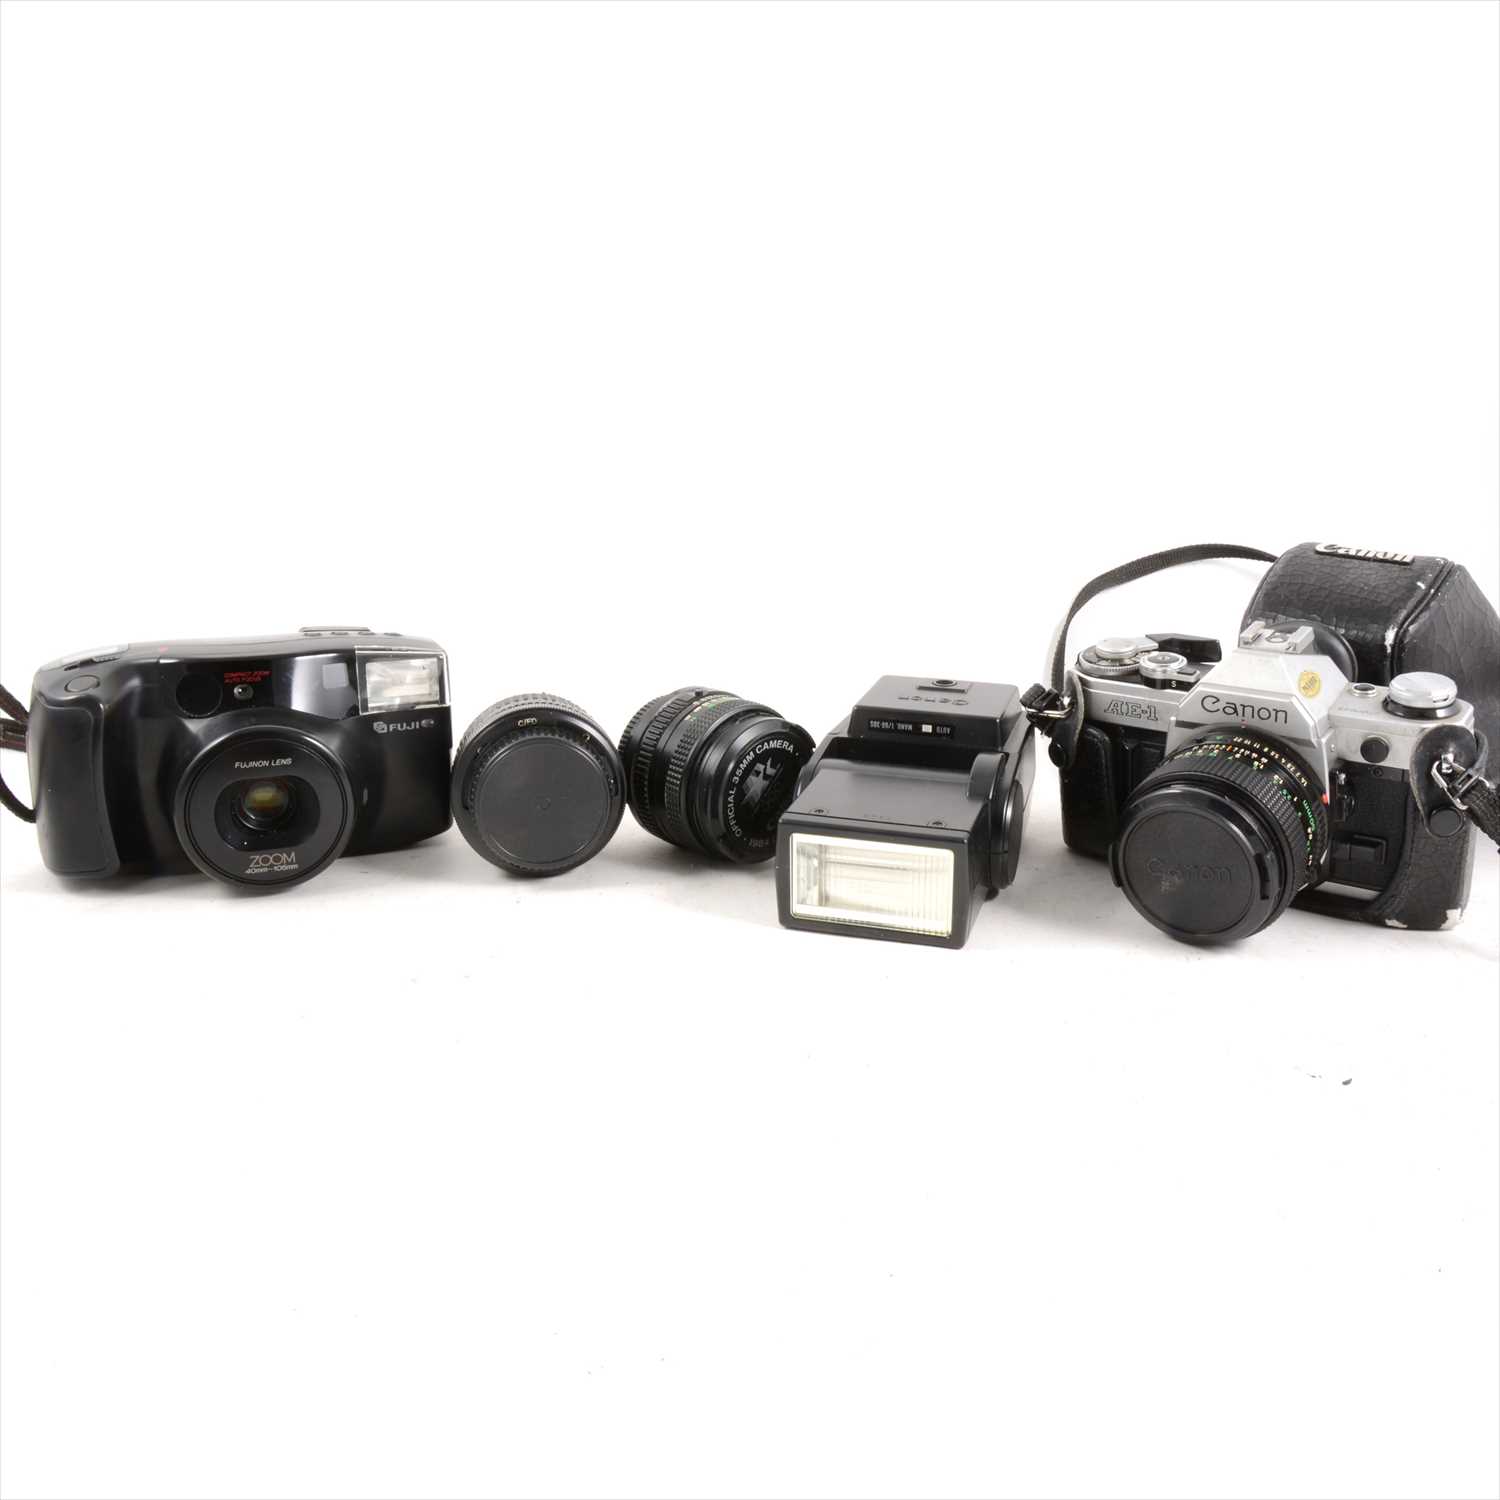 Lot 141 - Canon AE-1 SLR 35mm camera, with lens, and other photographic equipment